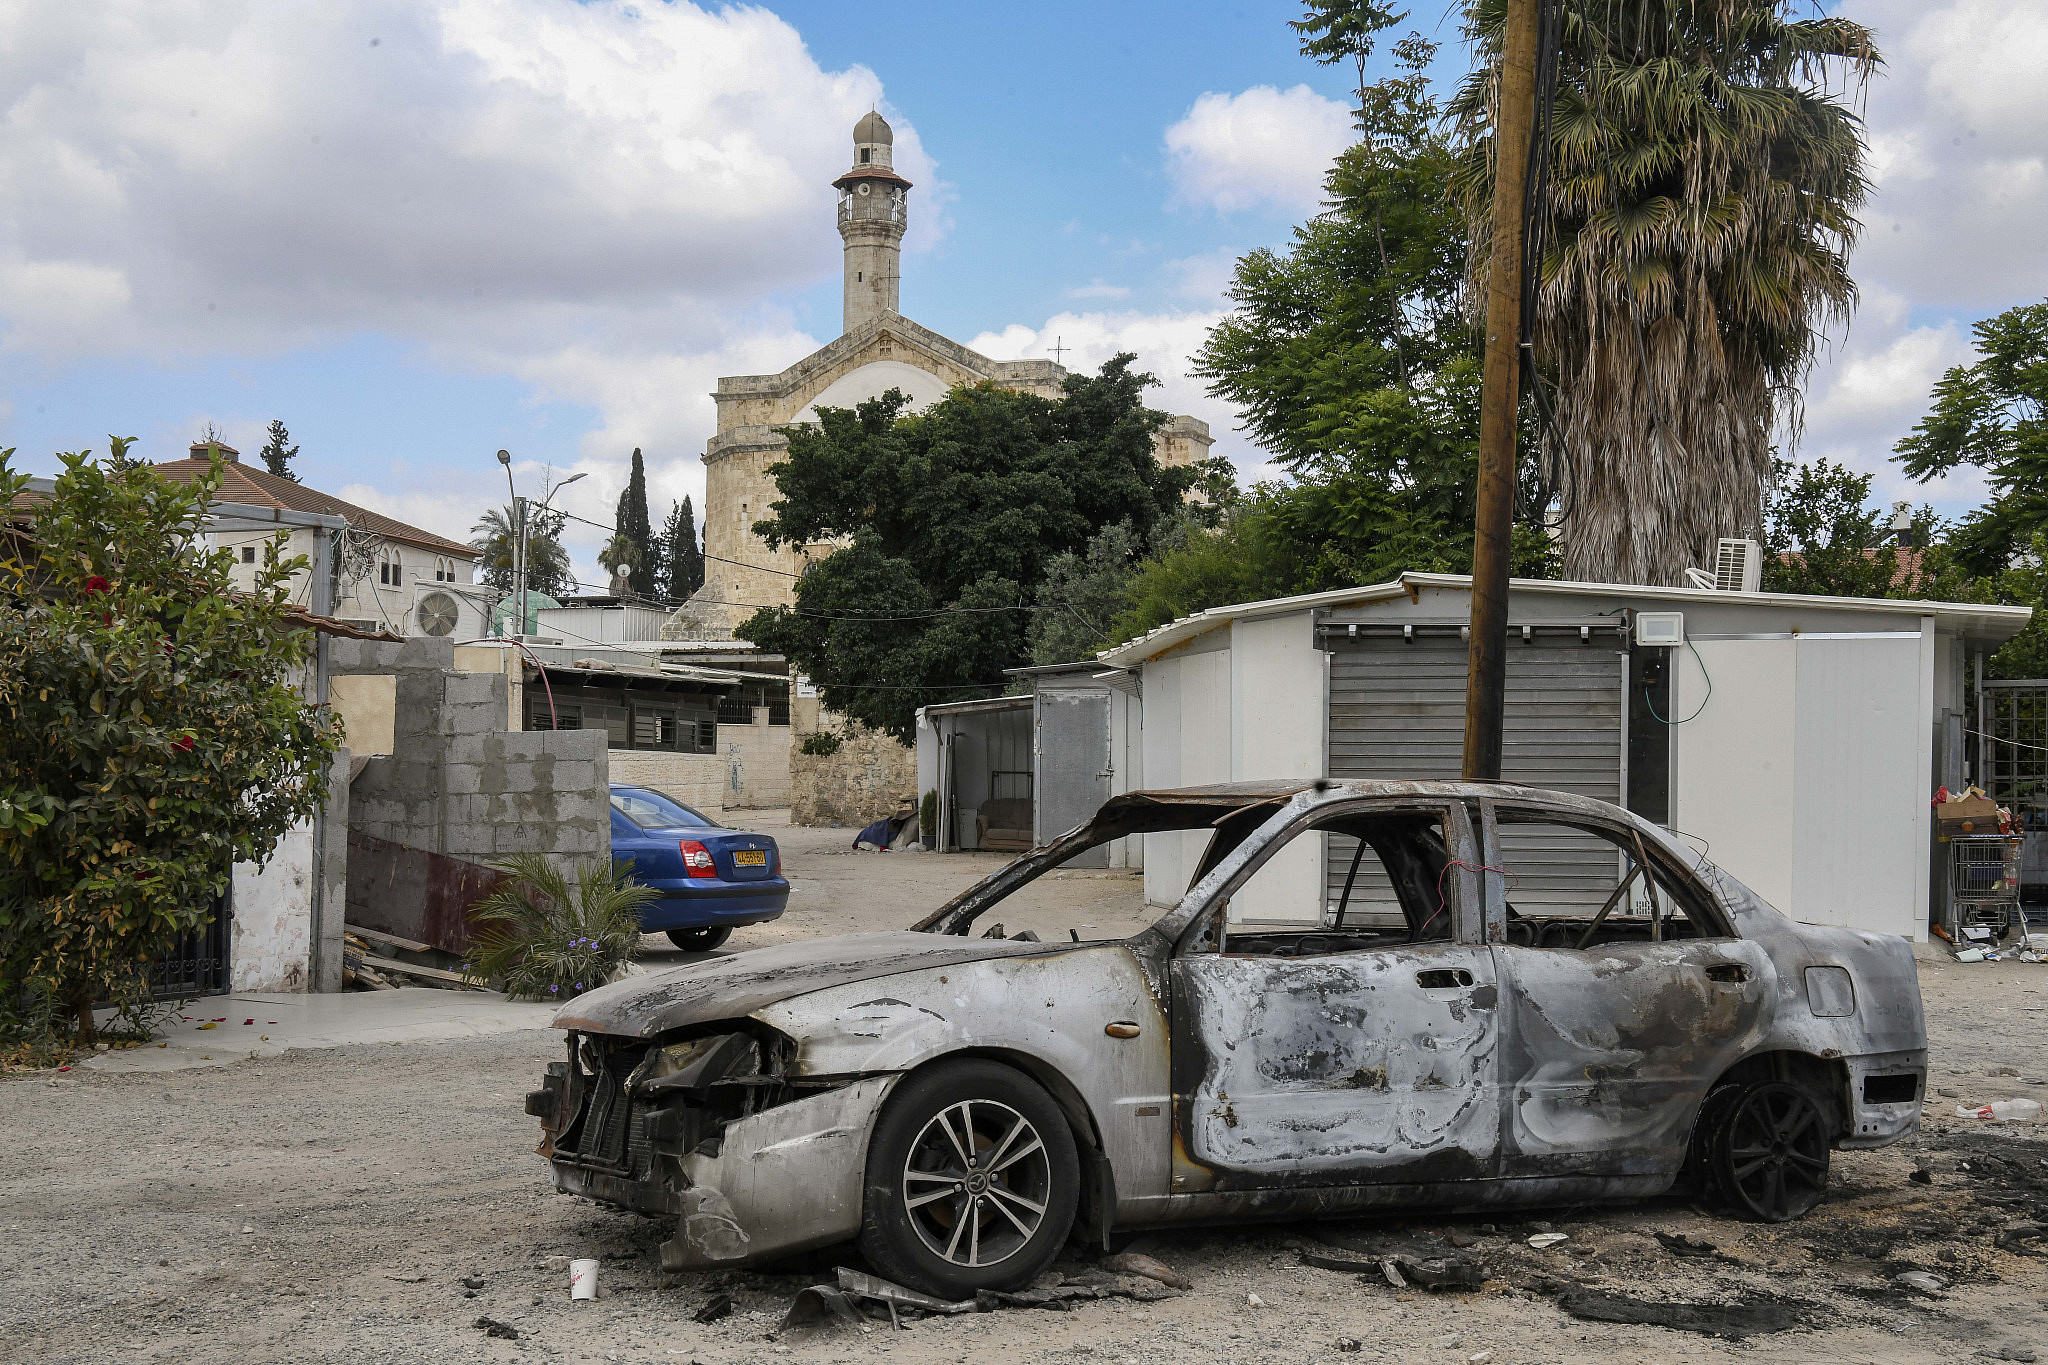 A car that was burned during clashes between Jewish and Arab residents of Lod, in the central Israeli city of Lod, May 23, 2021. (Flash90)